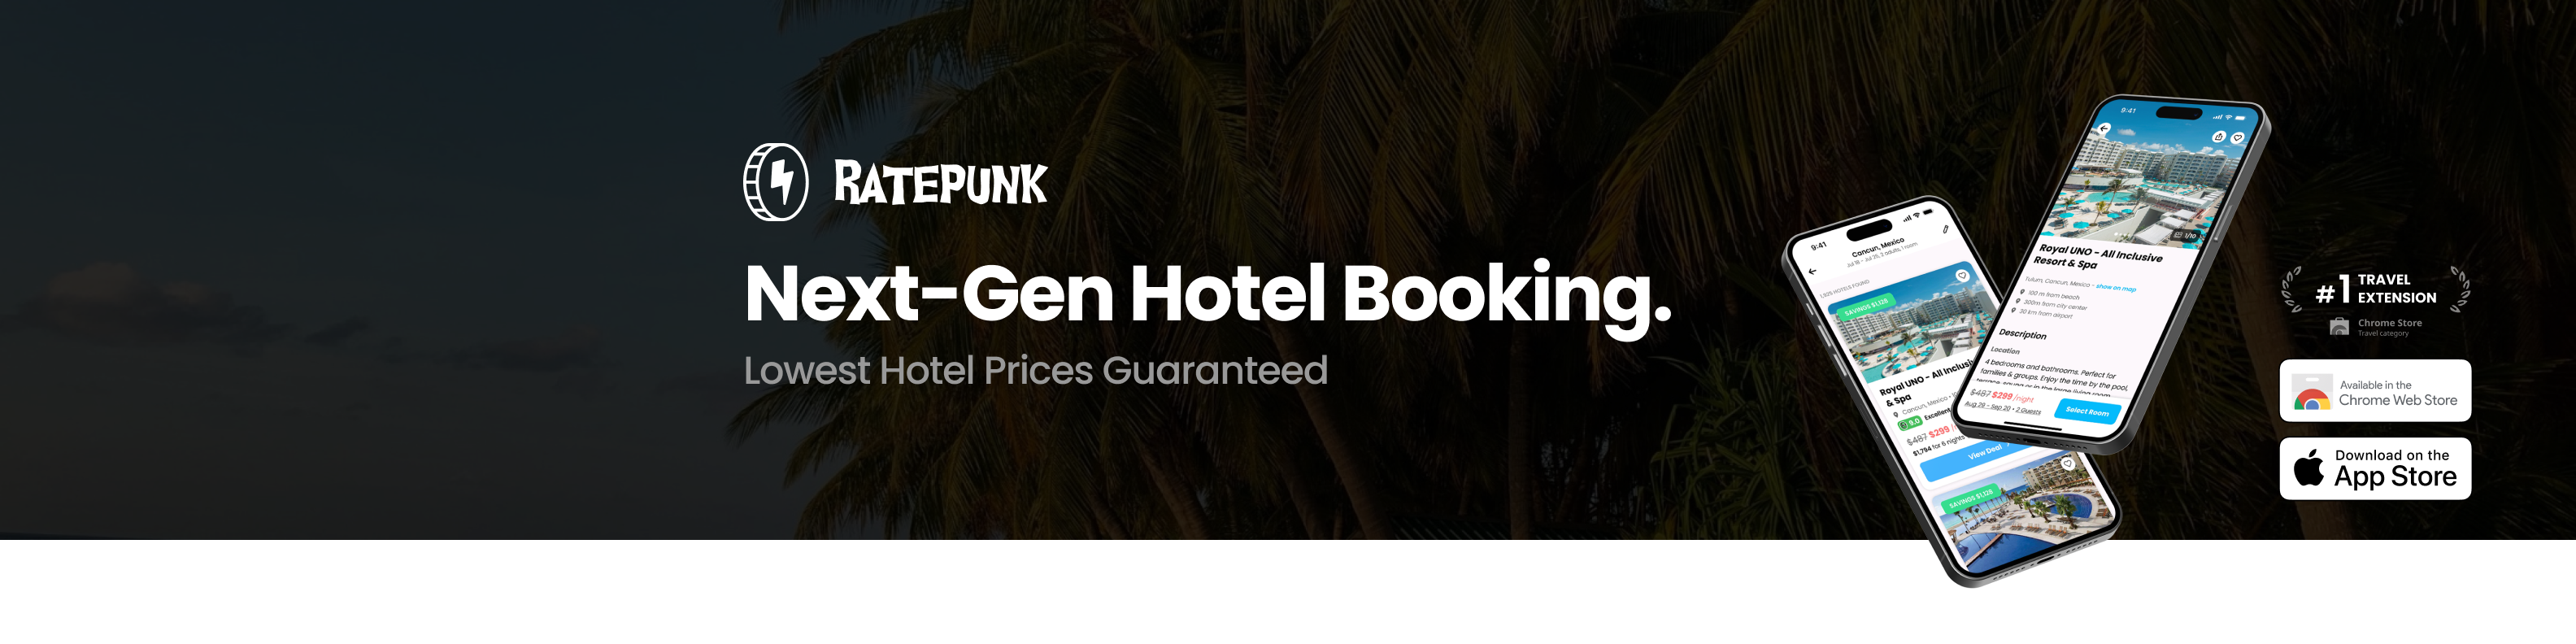 ratepunk- hotel booking and finding deals tool 